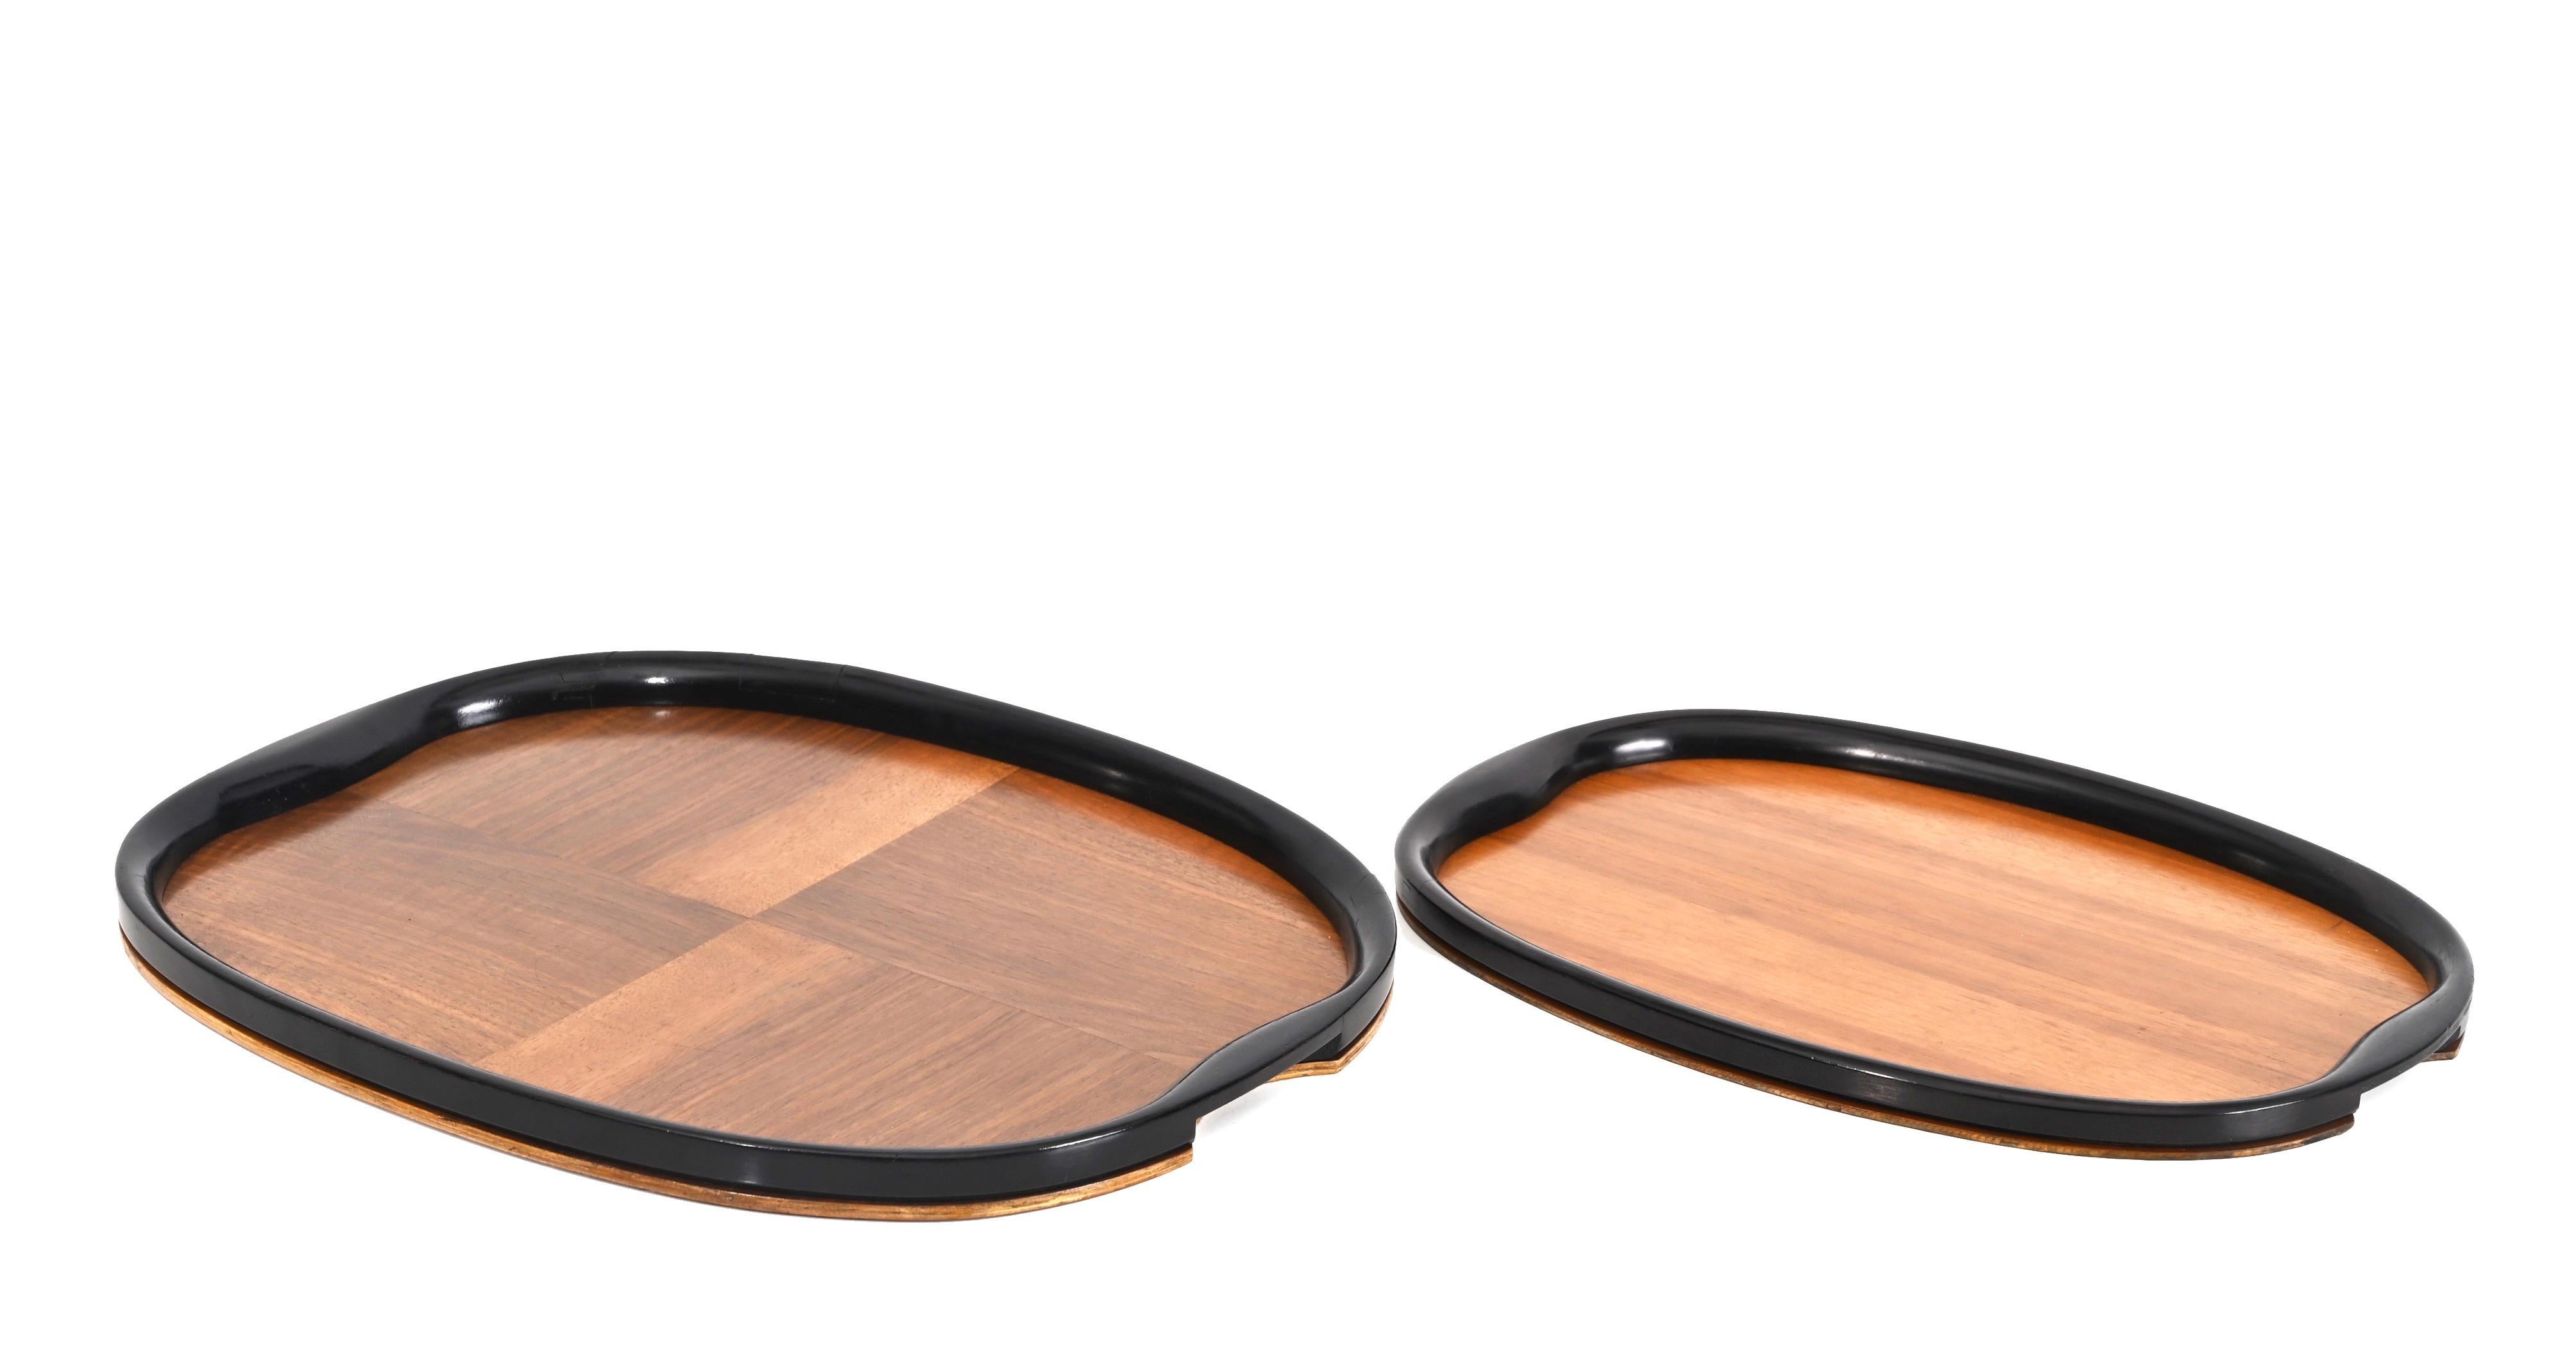 Pair of Art Deco Serving Trays, Ebonized Wood and Walnut, Italy, 1940s For Sale 5